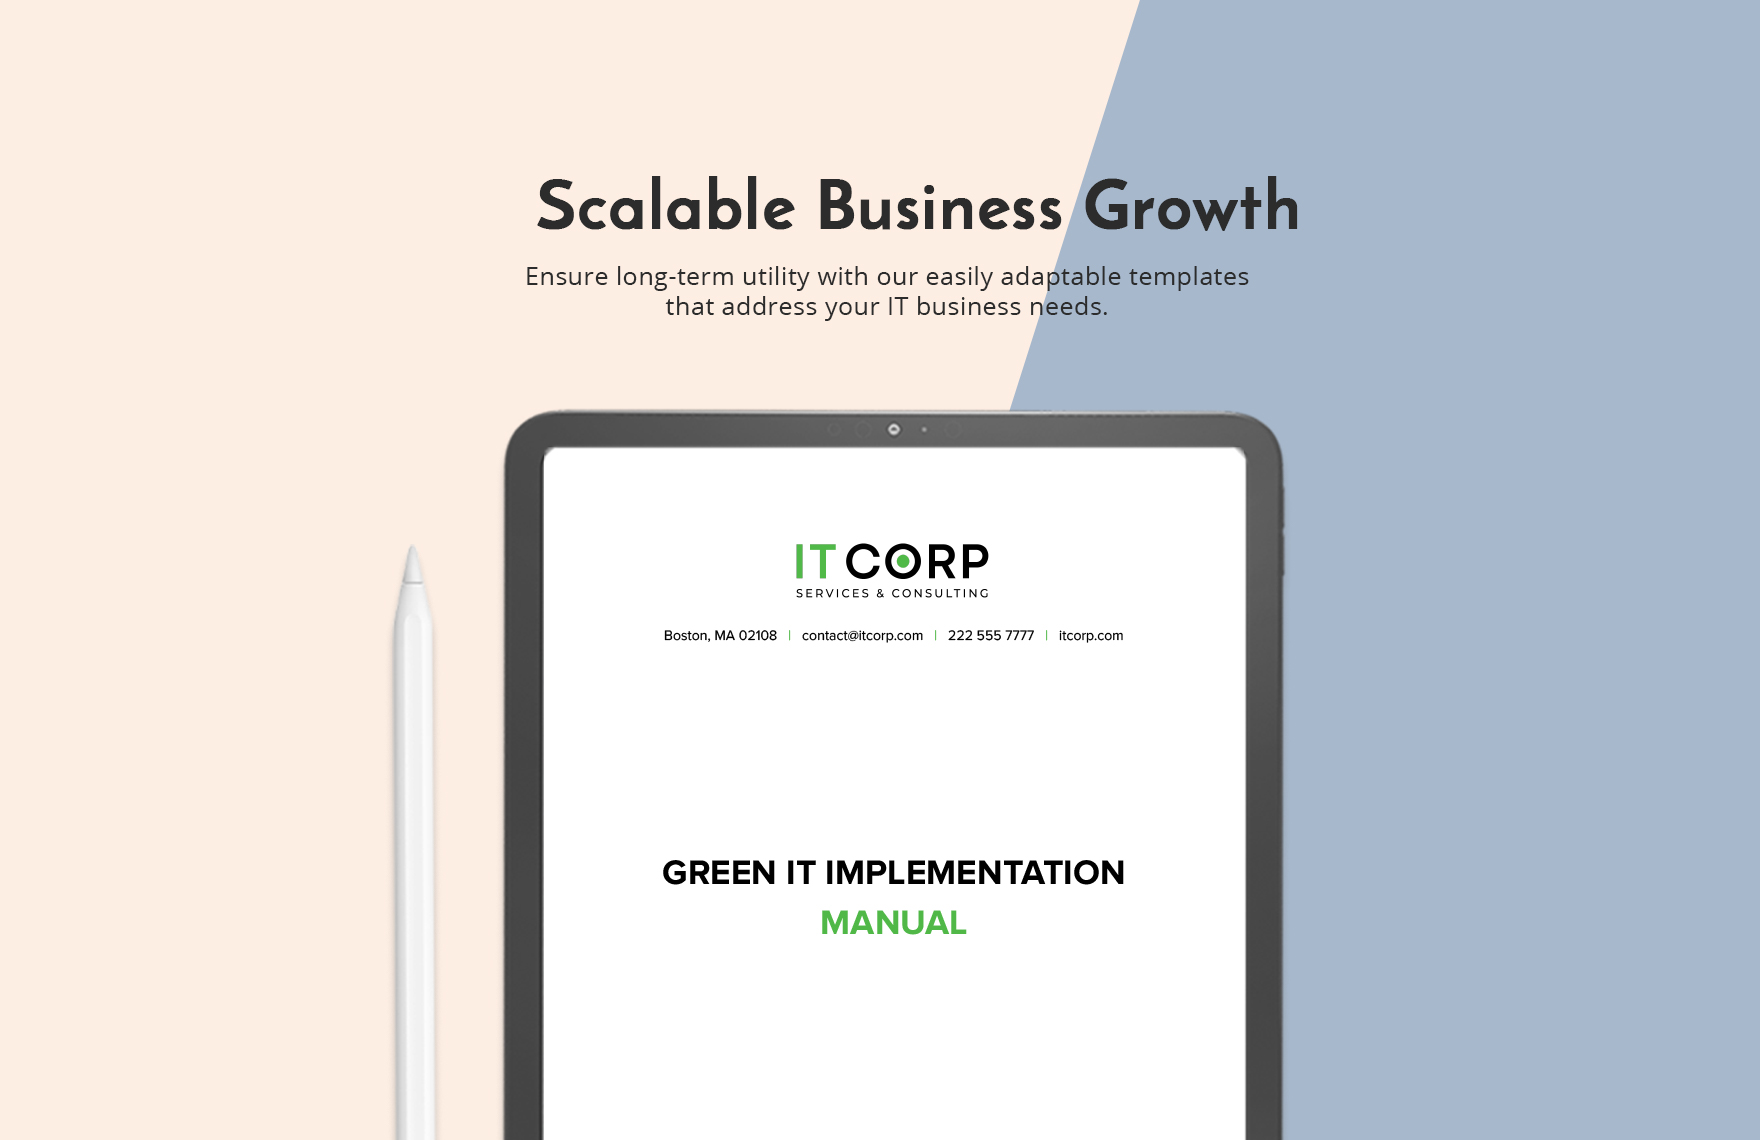 Green IT Implementation Manual Template